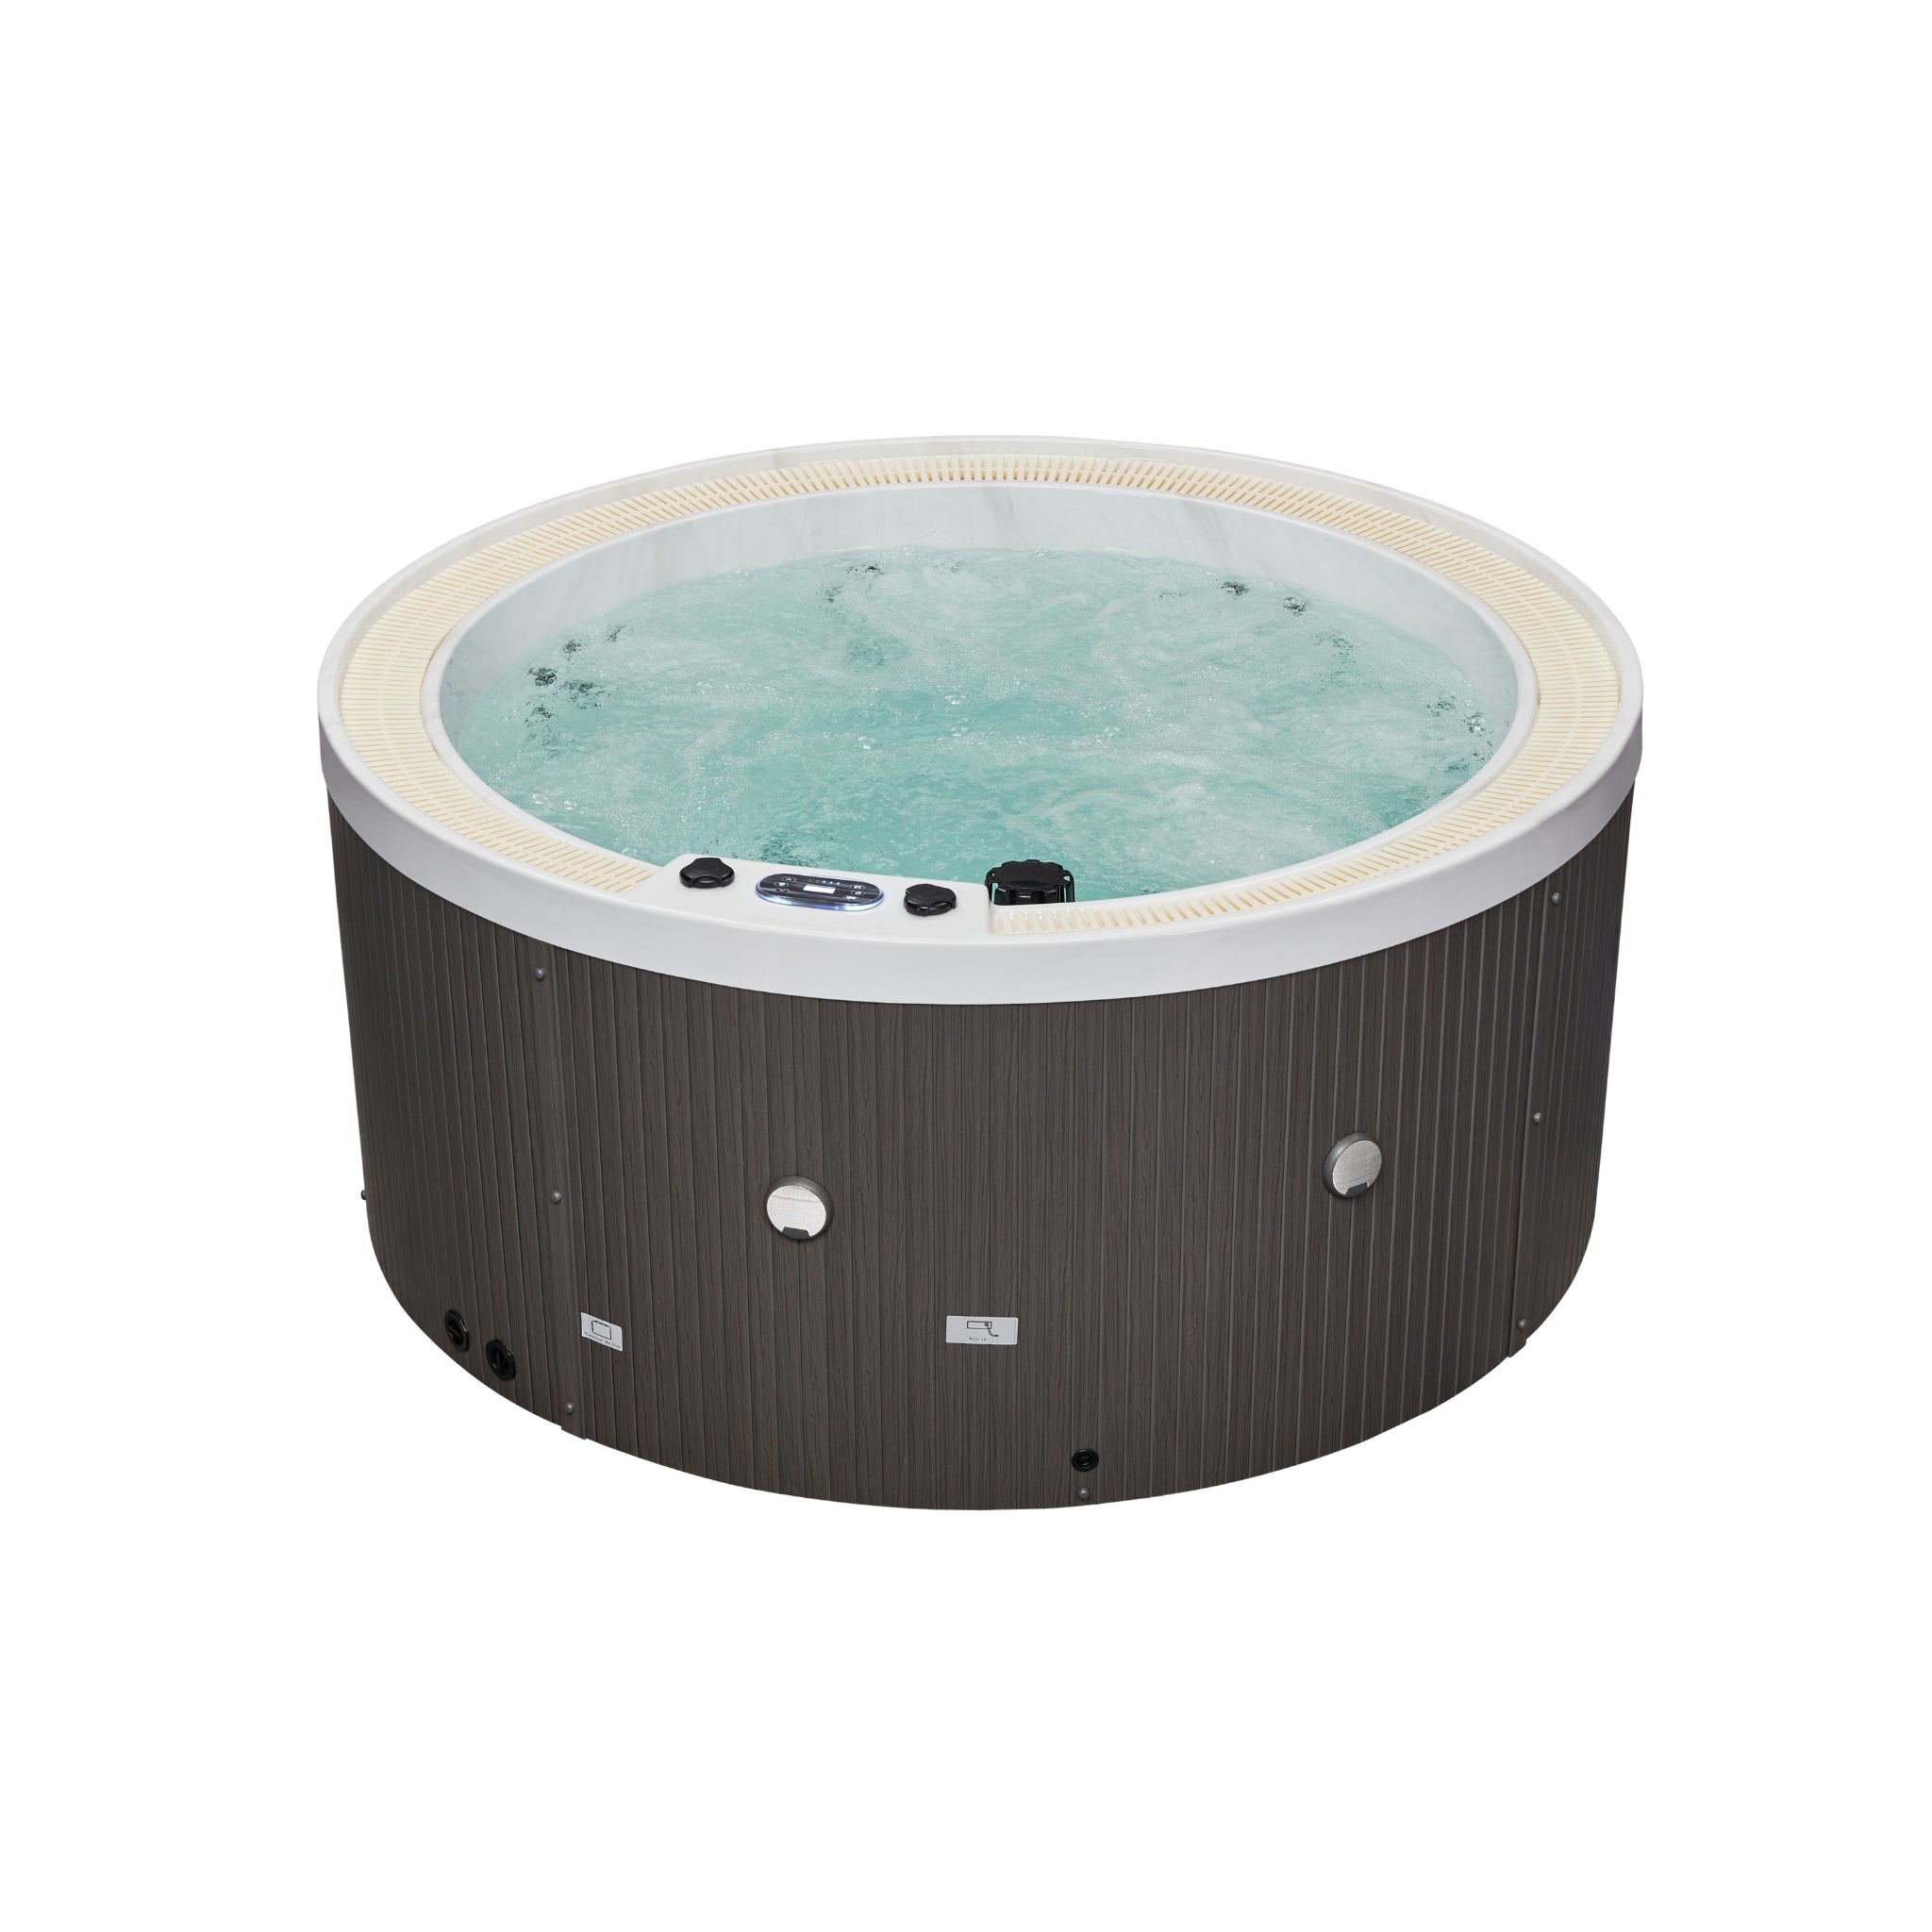 Oscar 6-Person 52 Jet Round Hot Tub with Cloud Gray Interior and Bluetooth